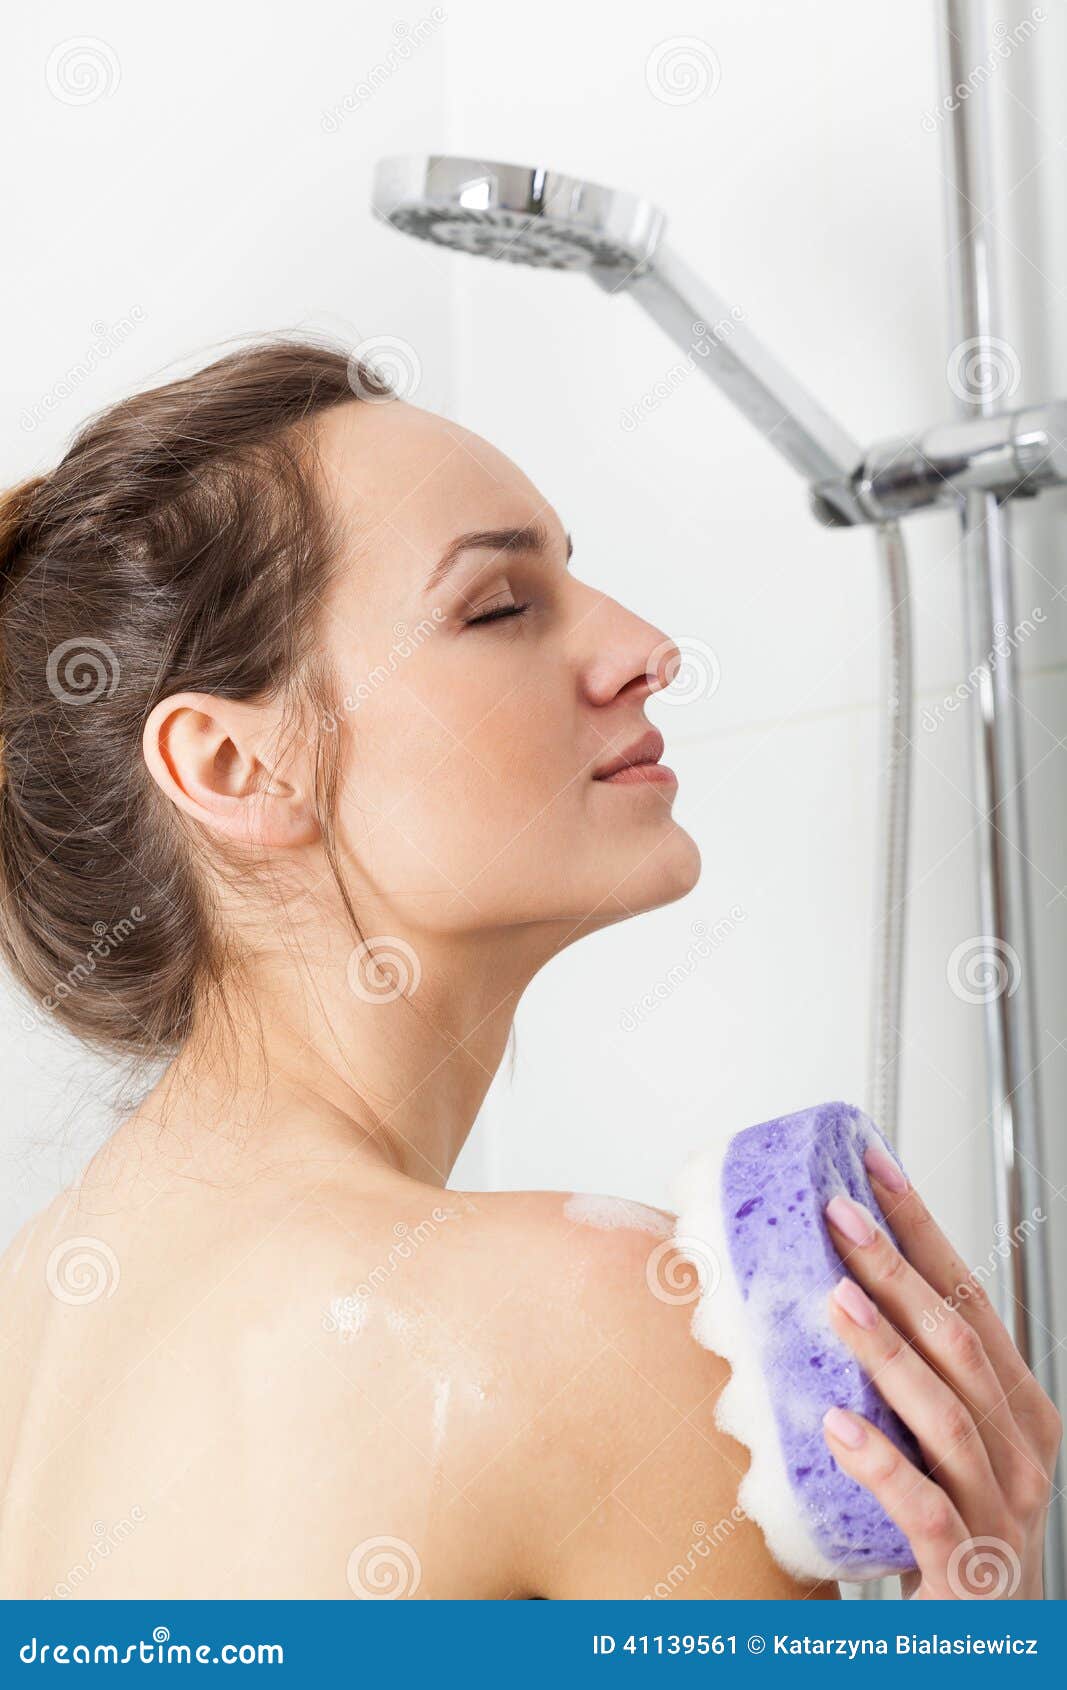 Woman Taking A Shower Stock Image Image Of Sensitive